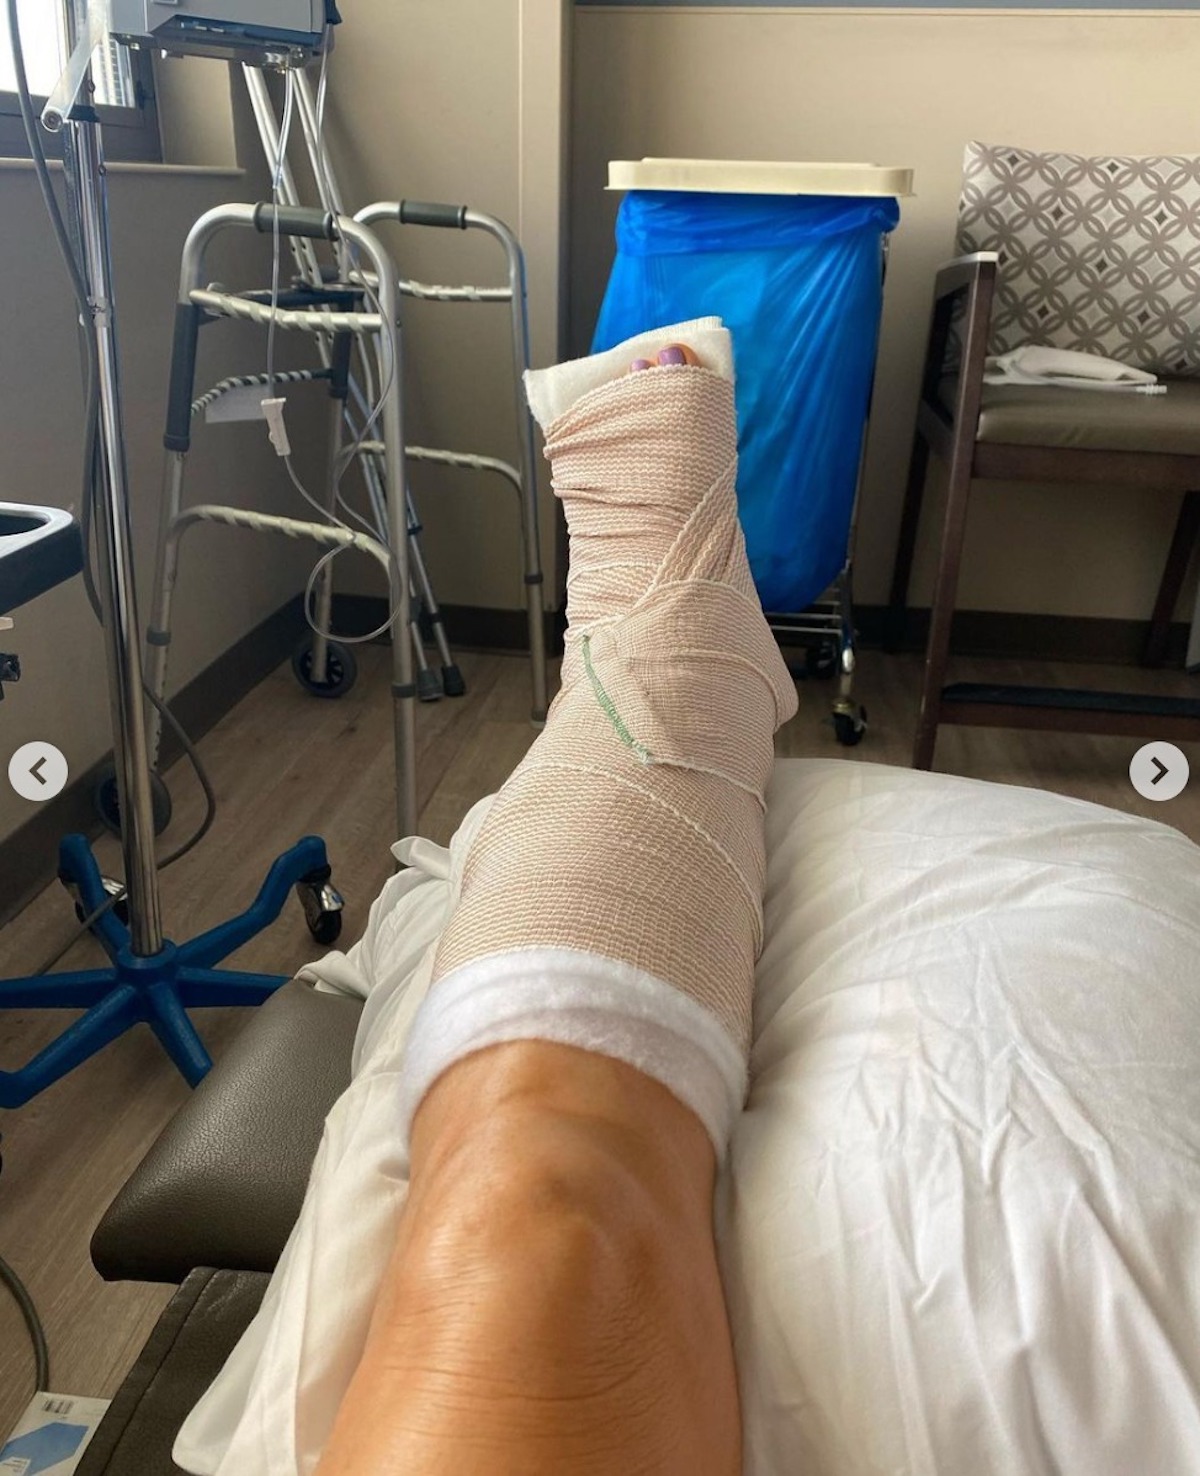 Katherine Kelly Lang incidente cavallo ospedale come sta